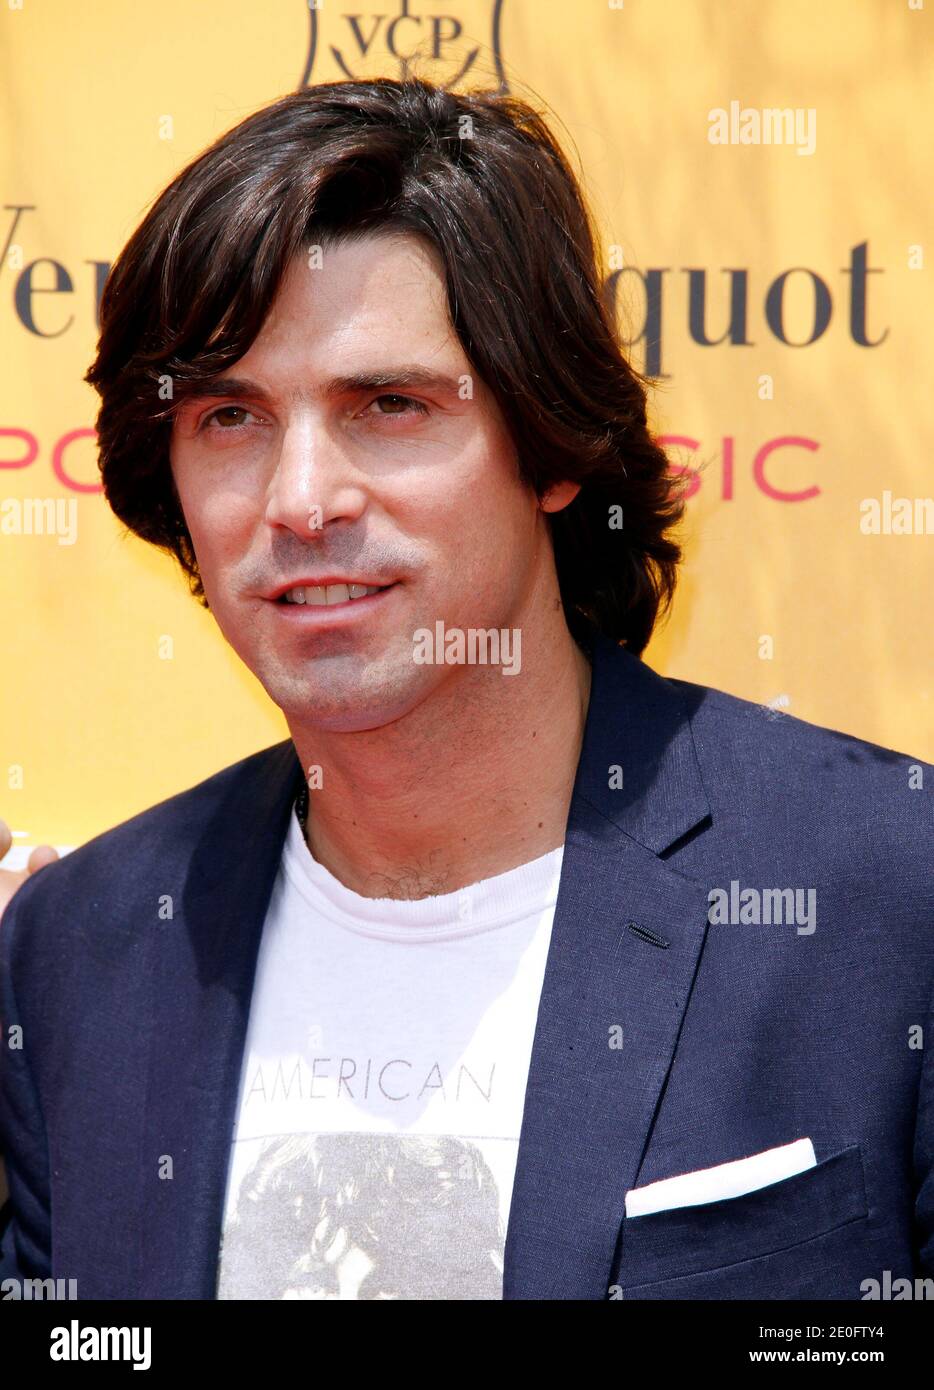 Nacho Figueras attends the 5th Annual Veuve Clicquot Polo Classic at Liberty State Park, NJ, USA, on June 2, 2012. Photo by Donna Ward/ABACAPRESS.COM Stock Photo